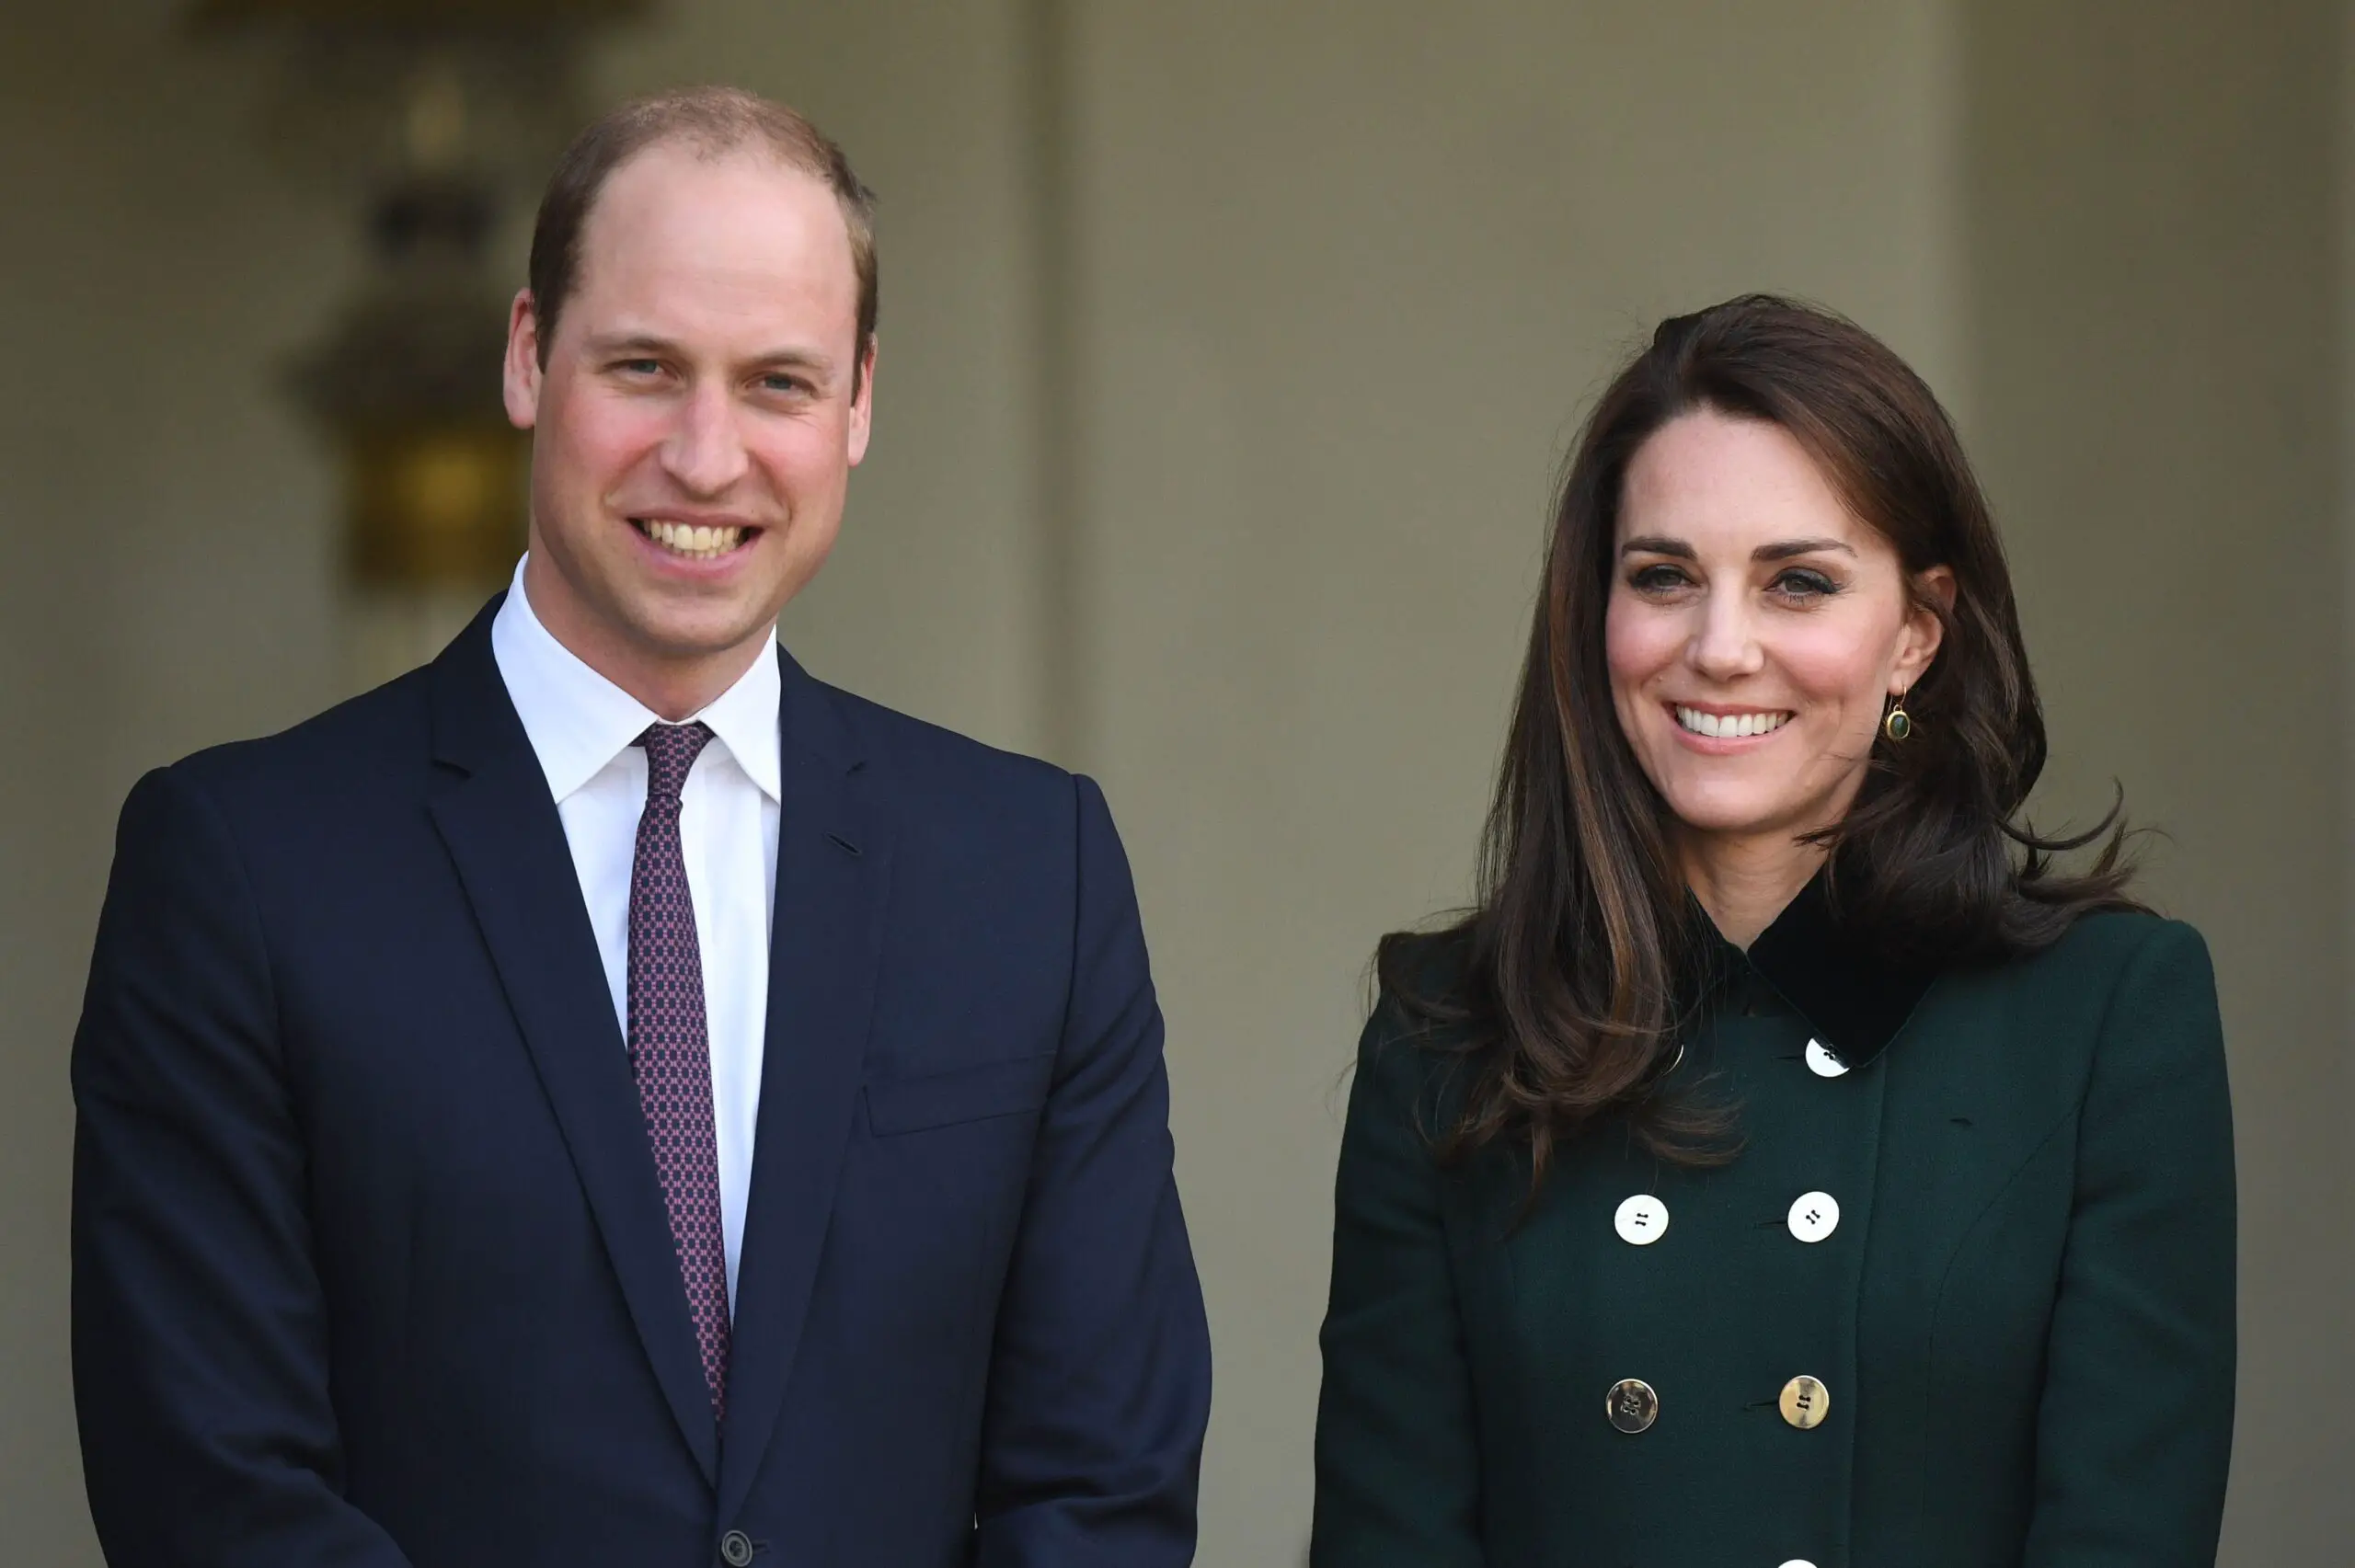 Prince William and his wife Catherine, popularly The Duke and Duchess of Cambridge, now also hold the title of Duke of Cornwall and Duke of Rothsey now